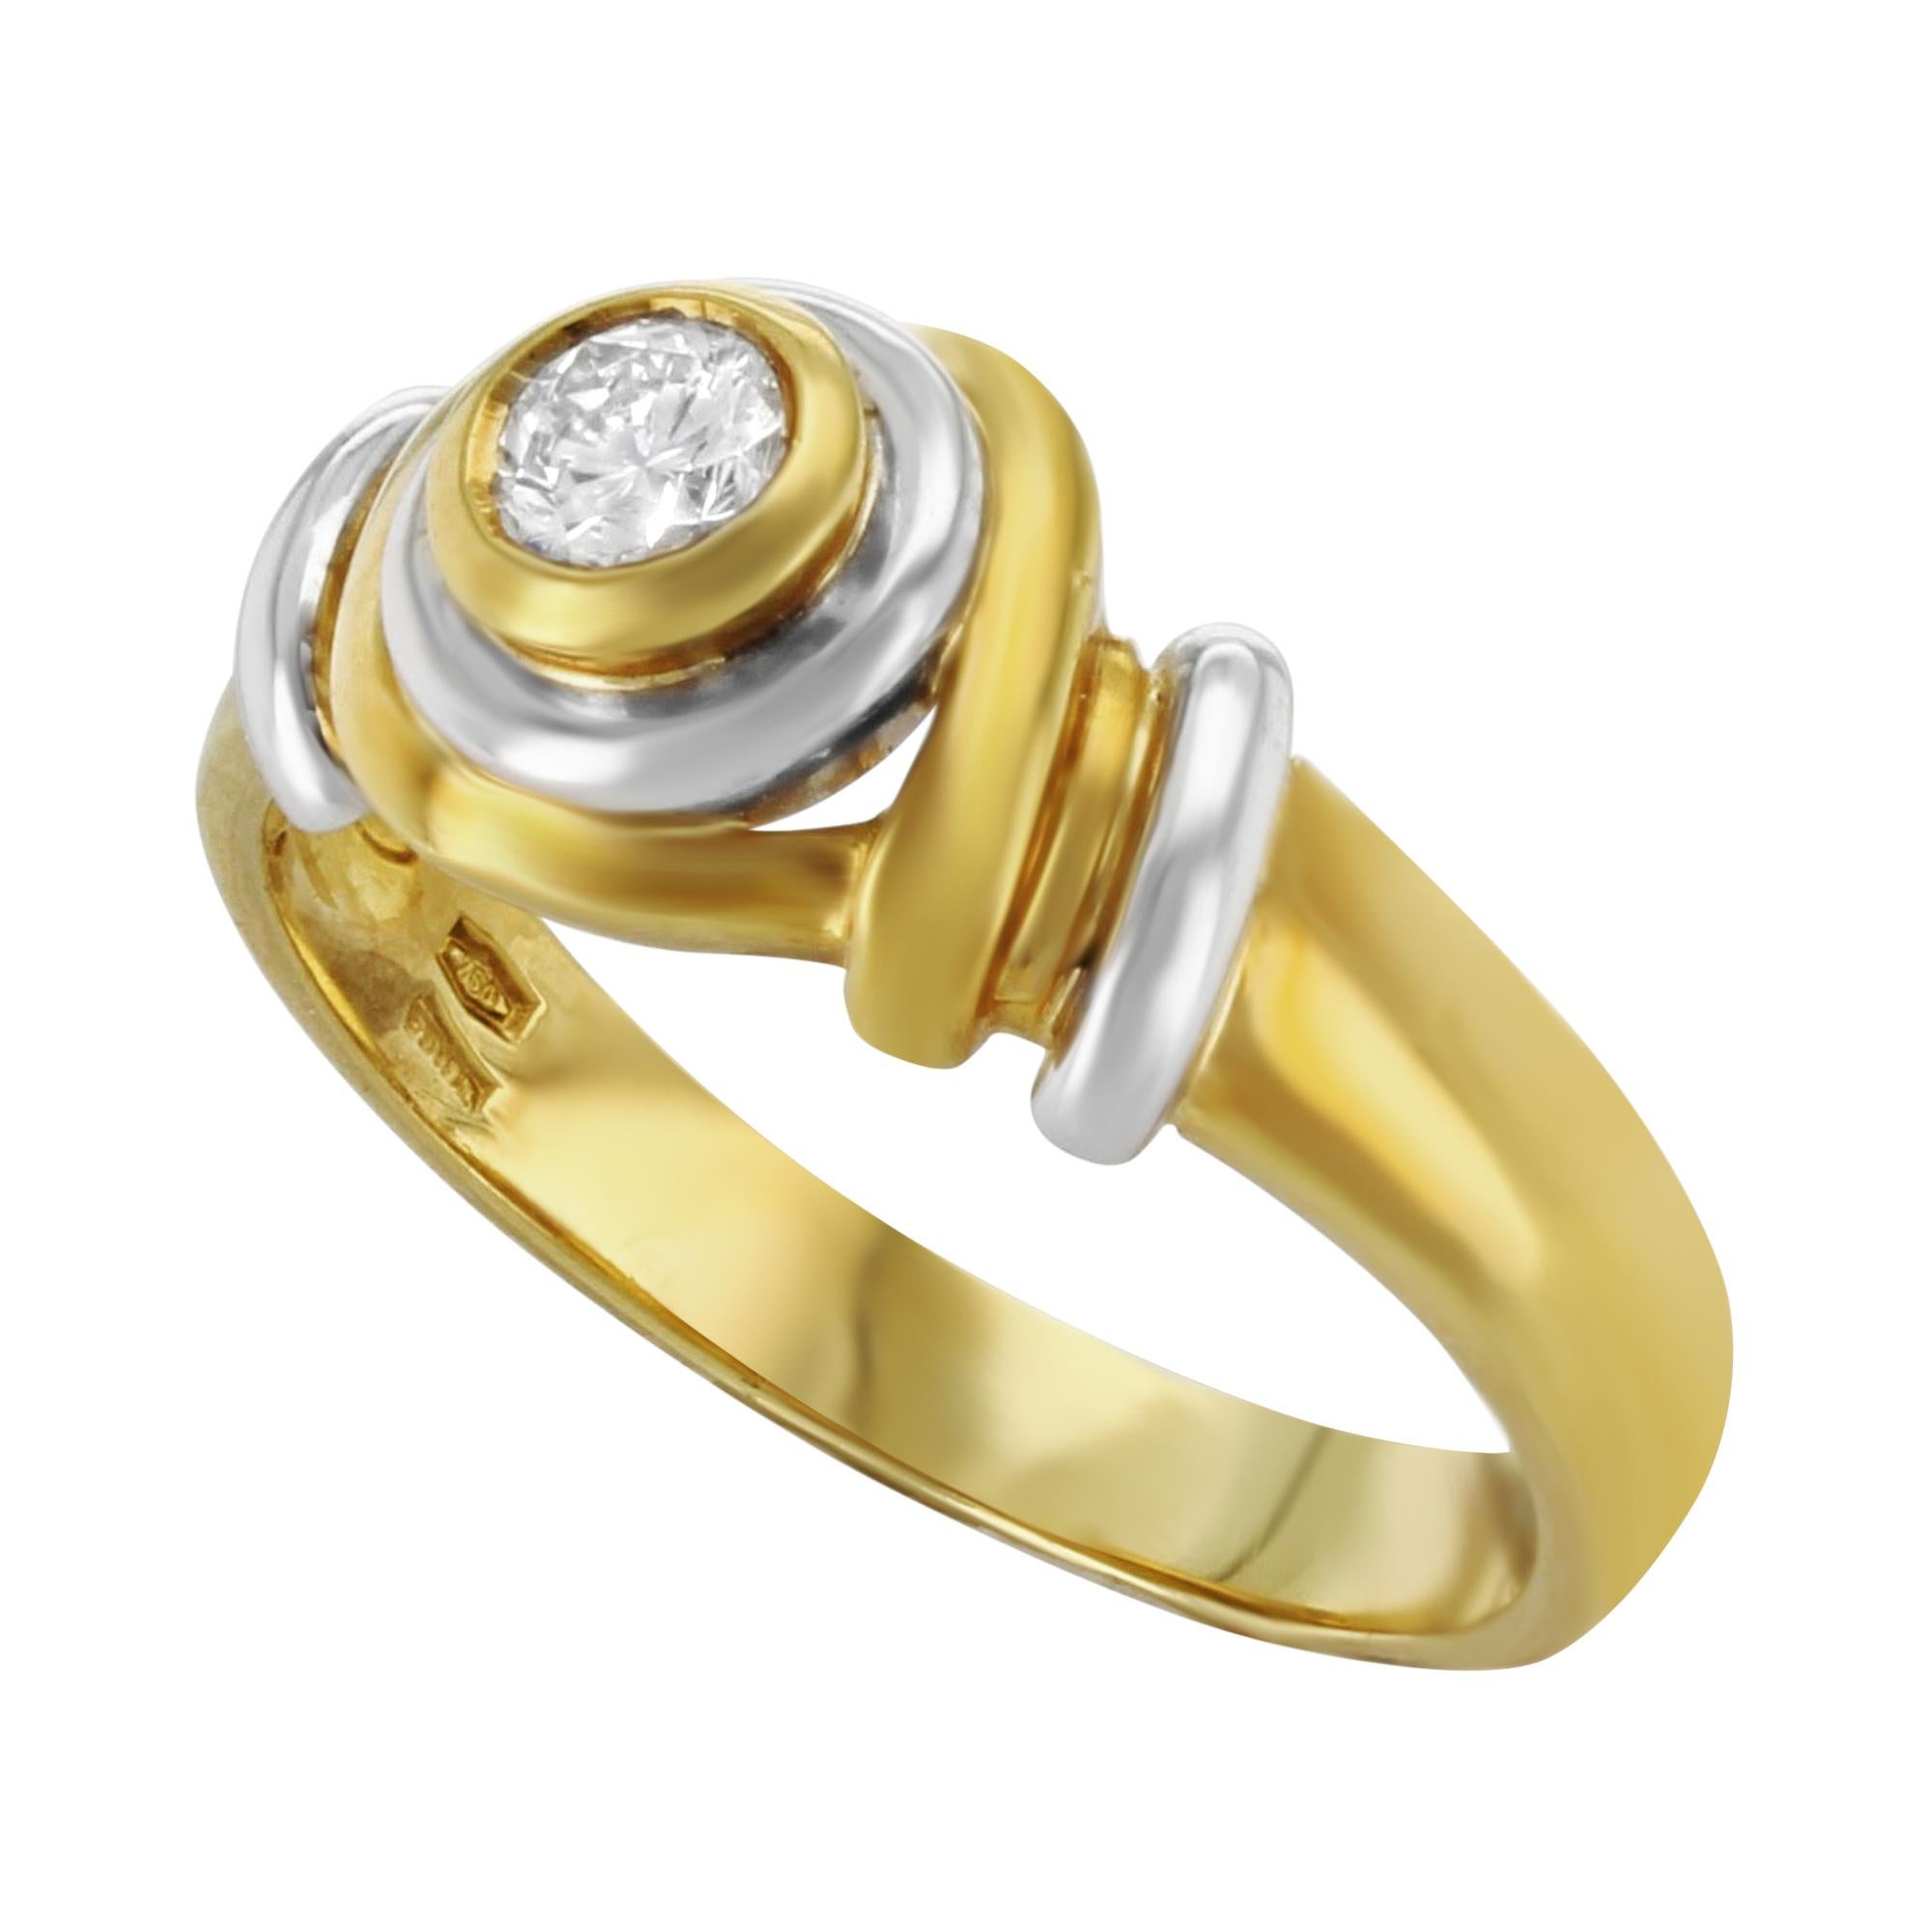 This contemporary ring is made of 18k yellow gold set with 0.20 cts diamond in bezel setting. The ring has white gold accents, which provides a very sophisticated style. Total ring weight: 5.5 grams. Ring size 8. The ring is available to be resized,